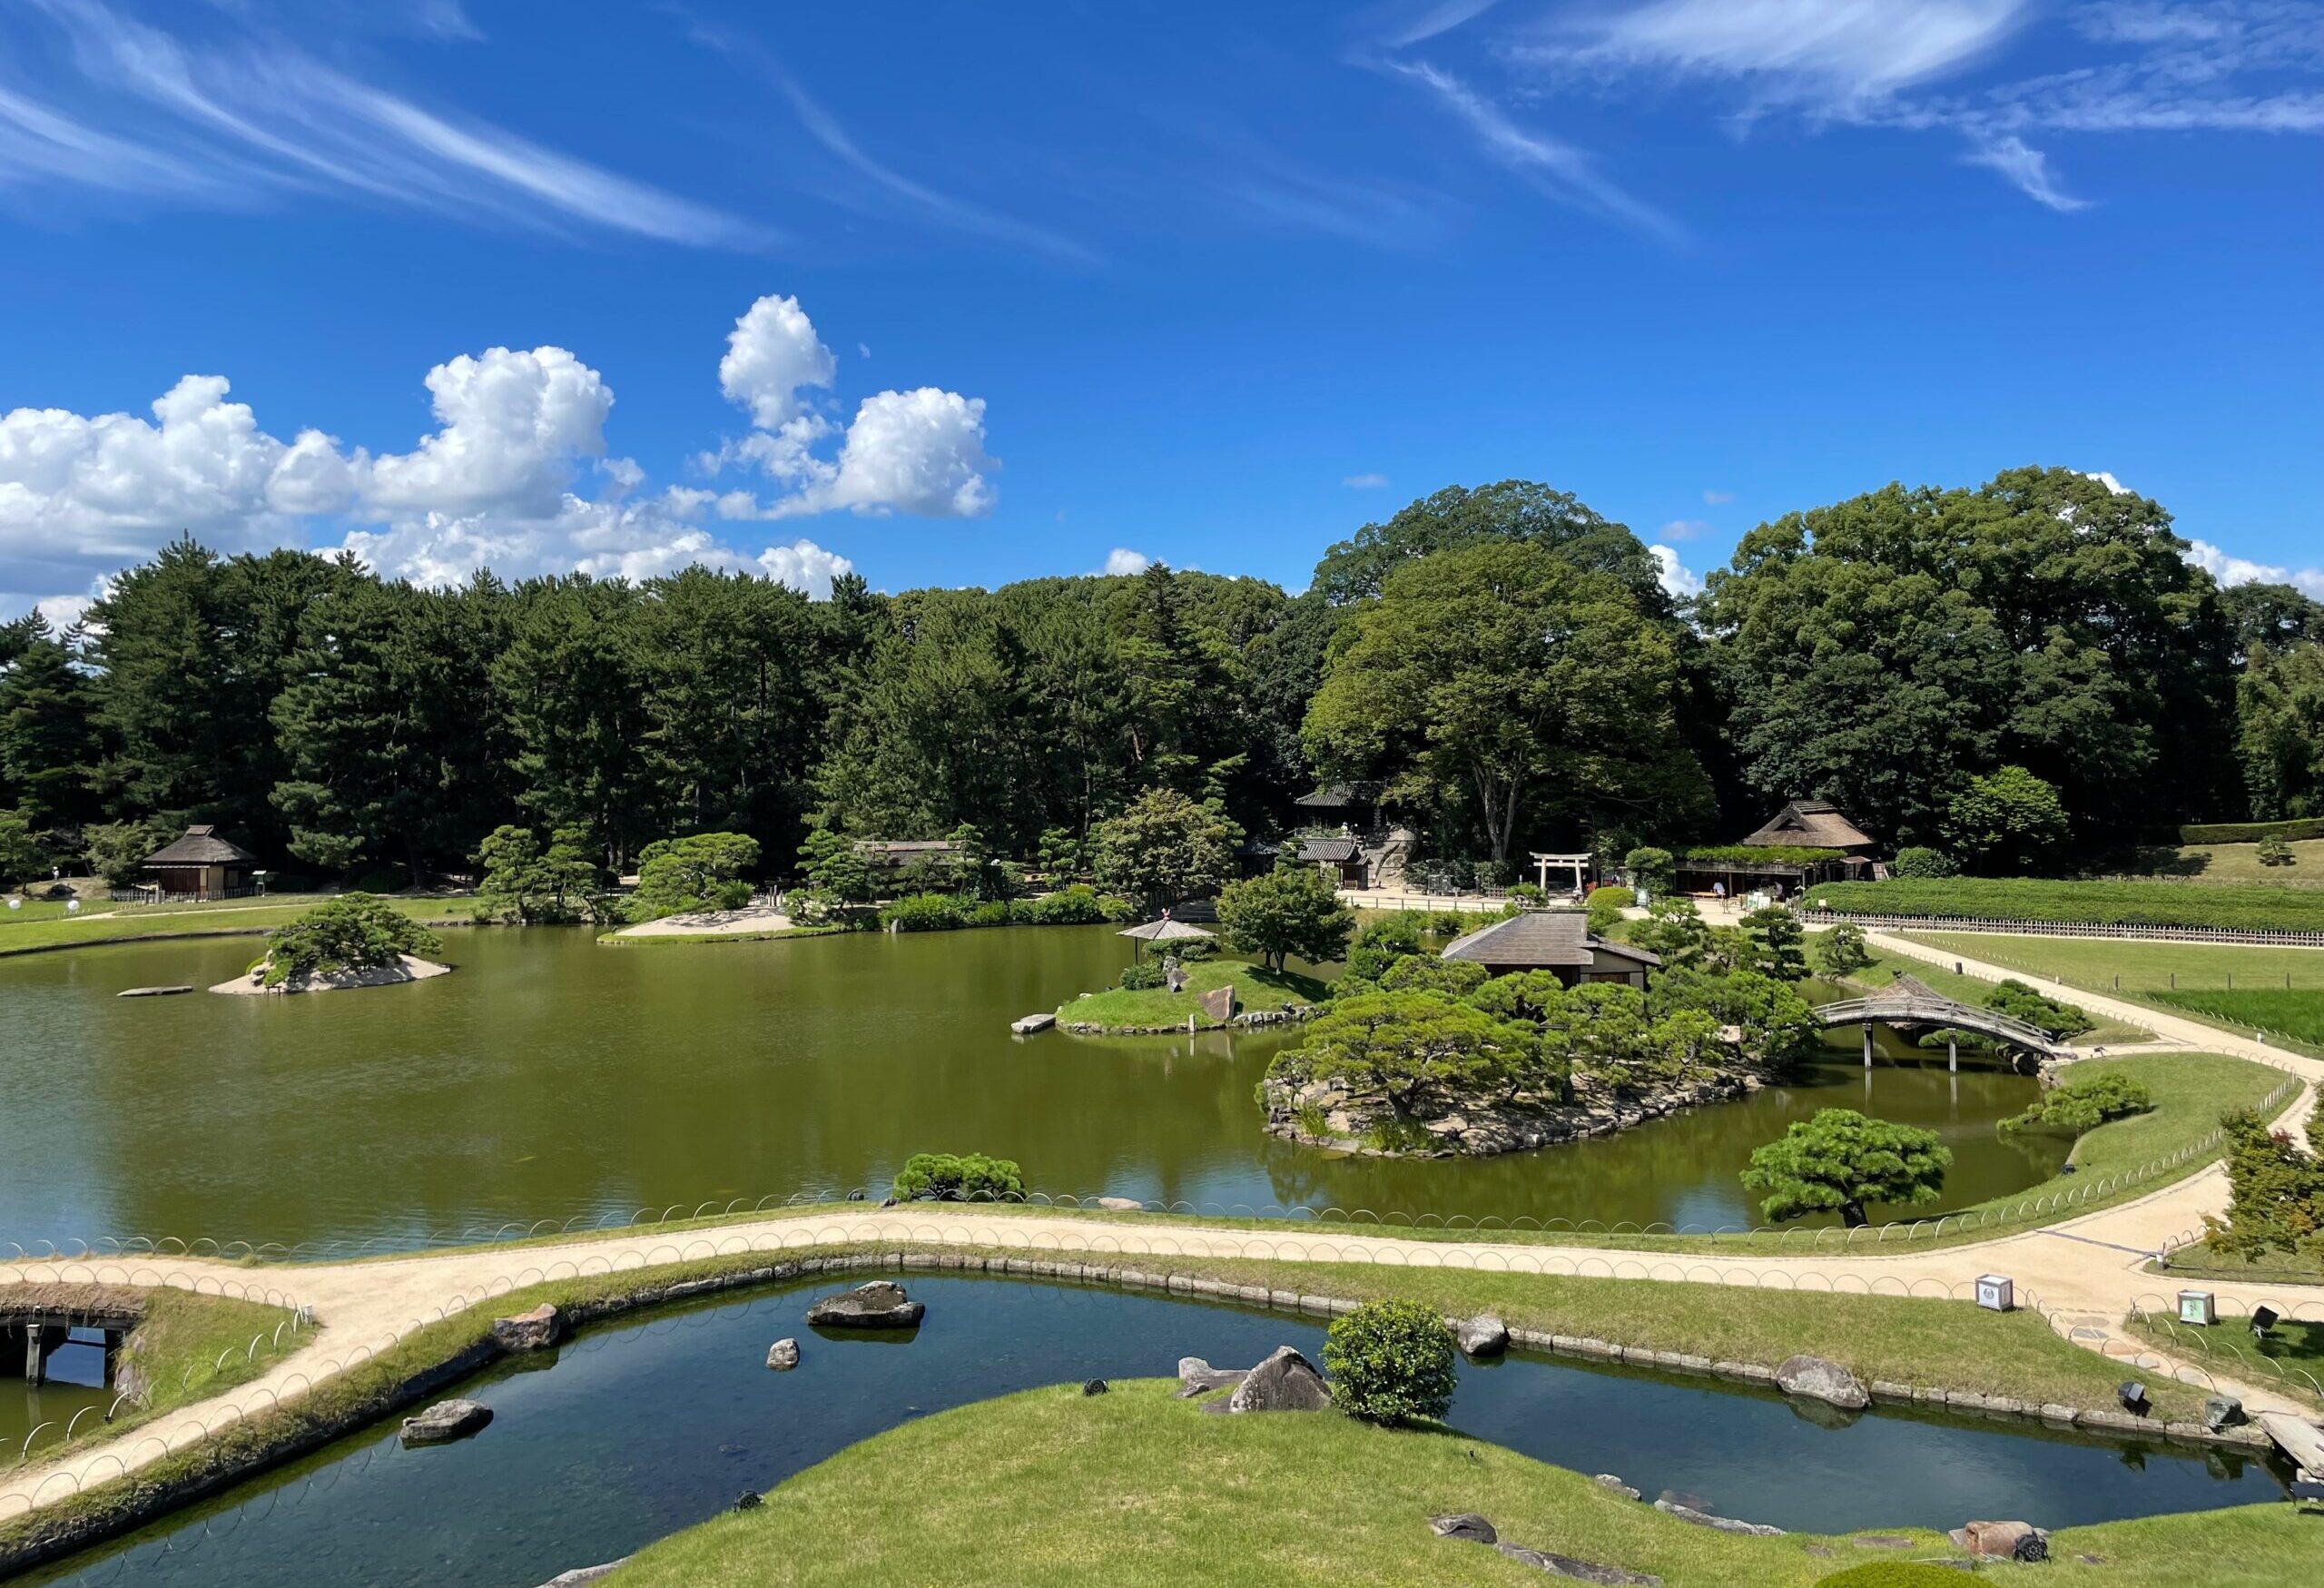 Visiting 2 out of 3 Great Gardens in Japan. Are Kenroku-en in Kanazawa and Kōraku-en in Okayama one of the most beautiful parks in the country?